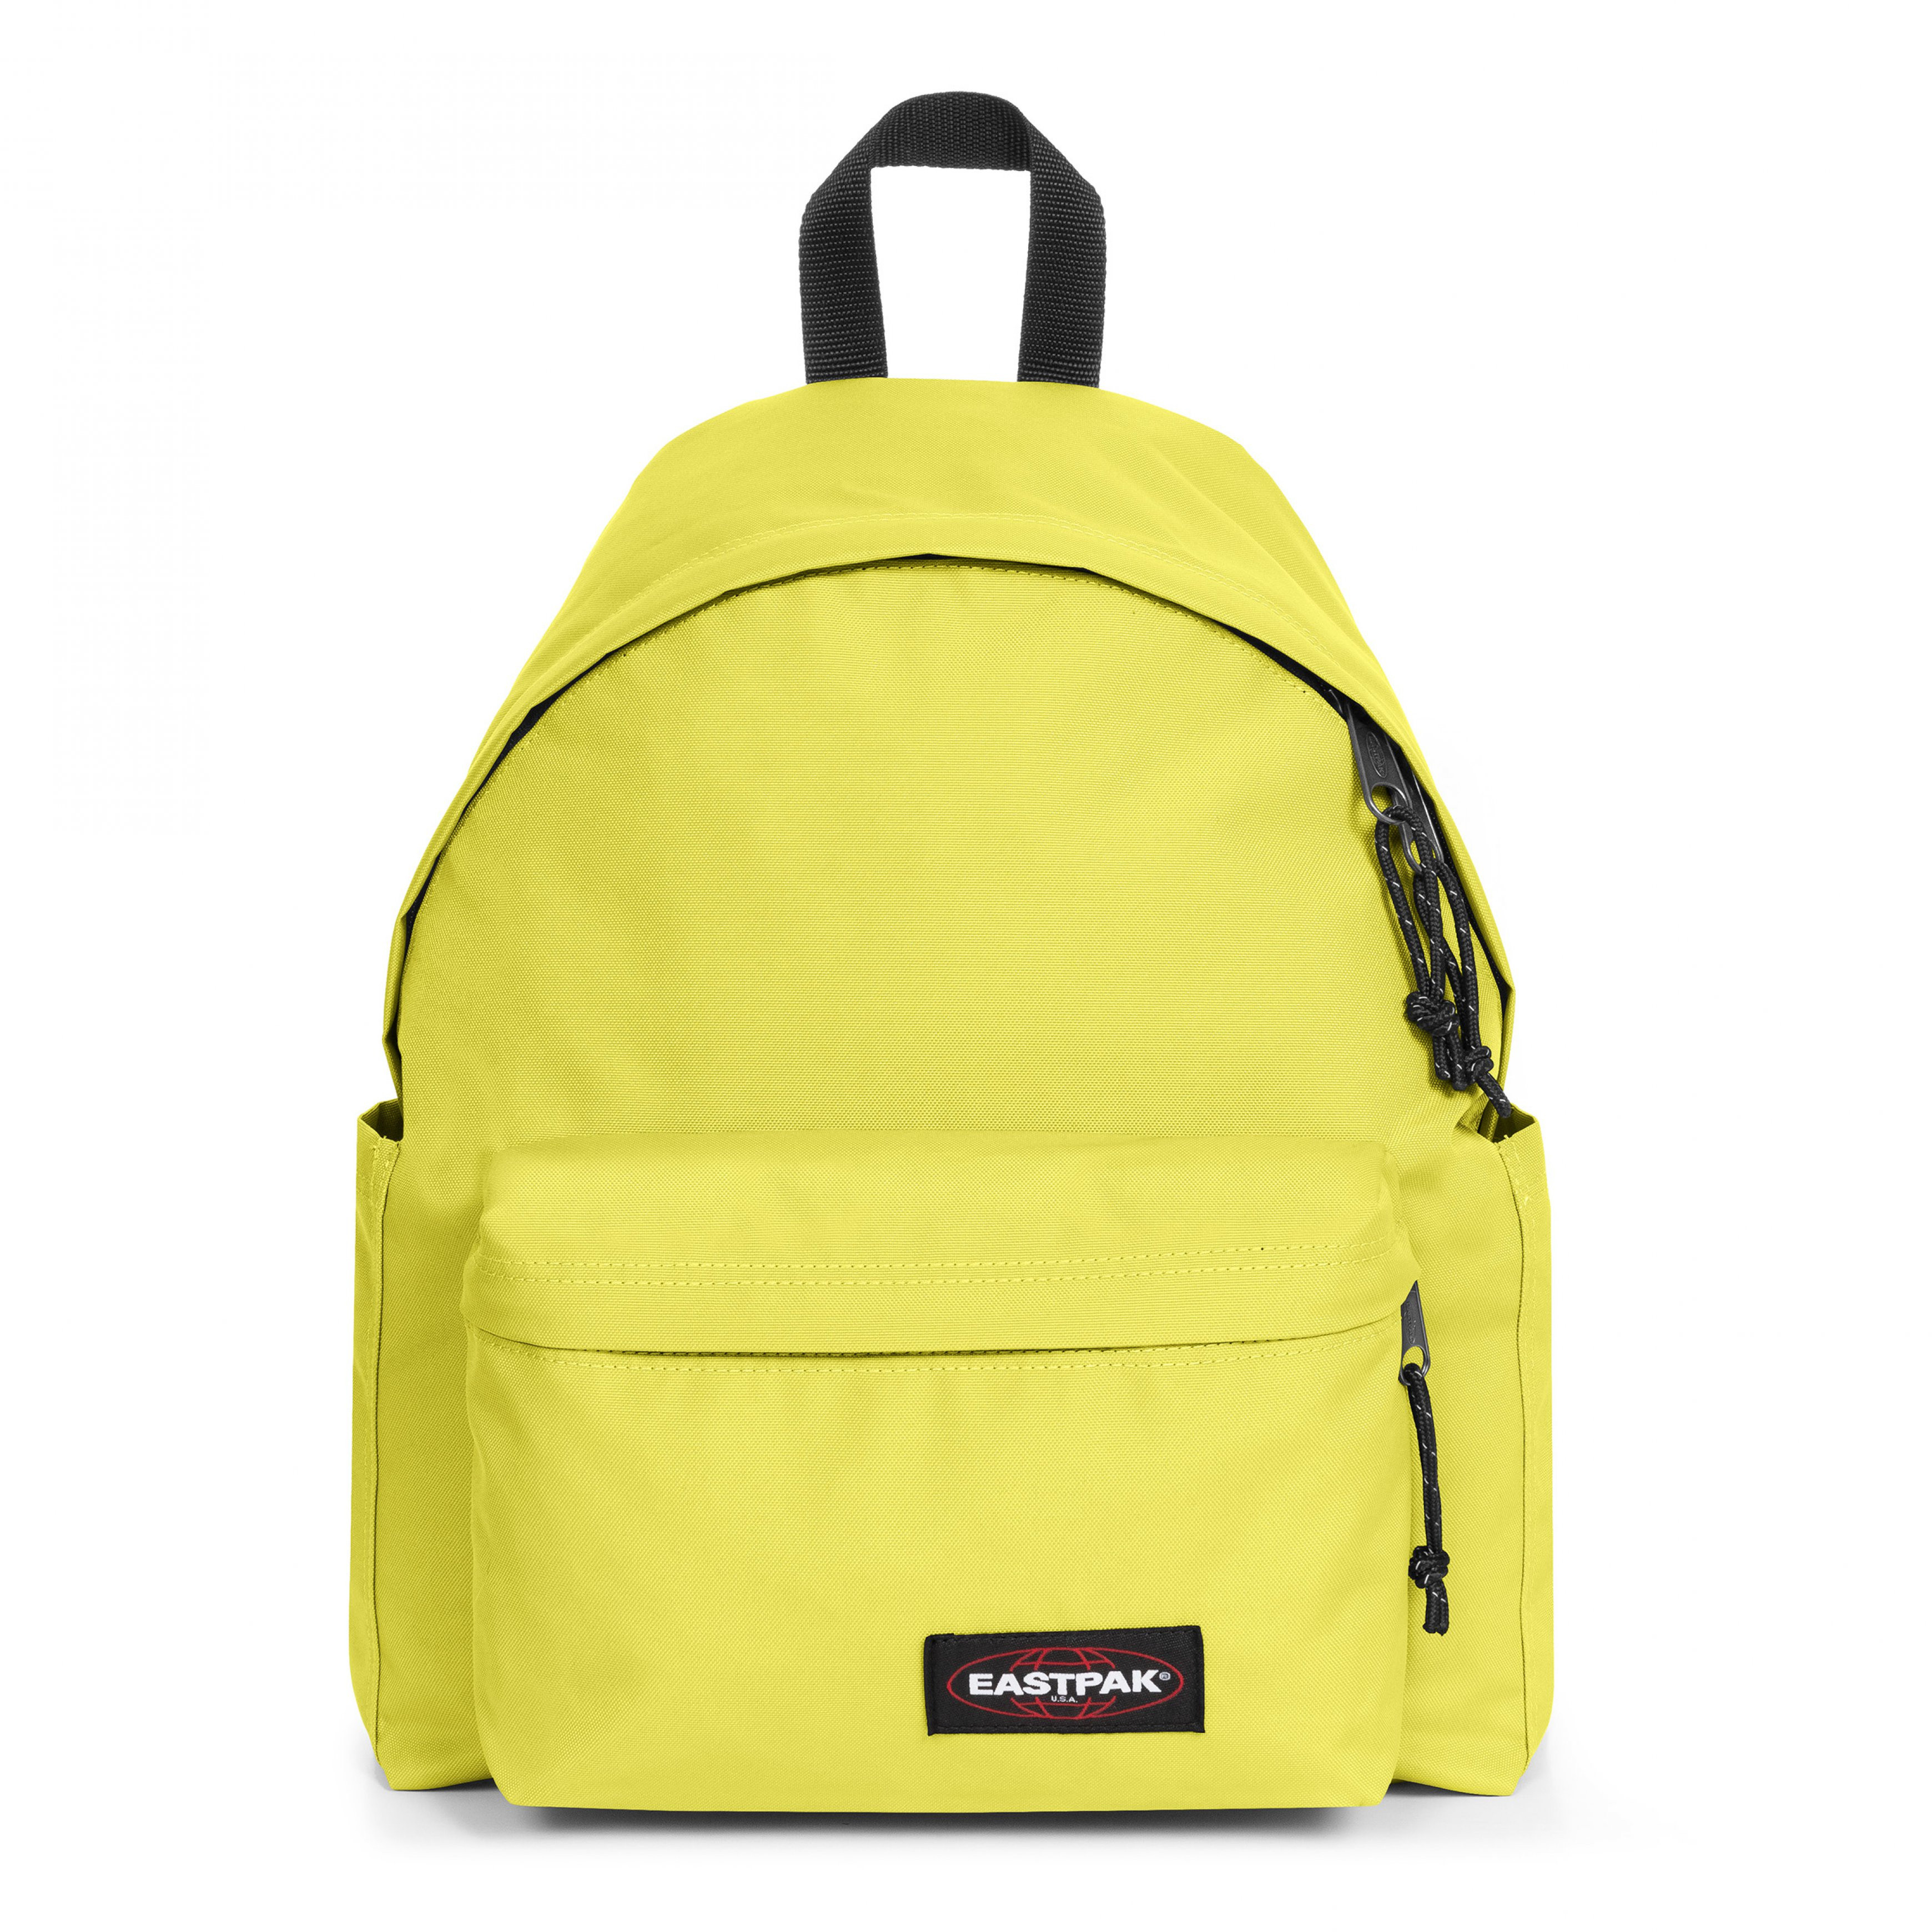 Eastpak - Zaino Day Pak'r Neon Lime, Giallo, large image number 0